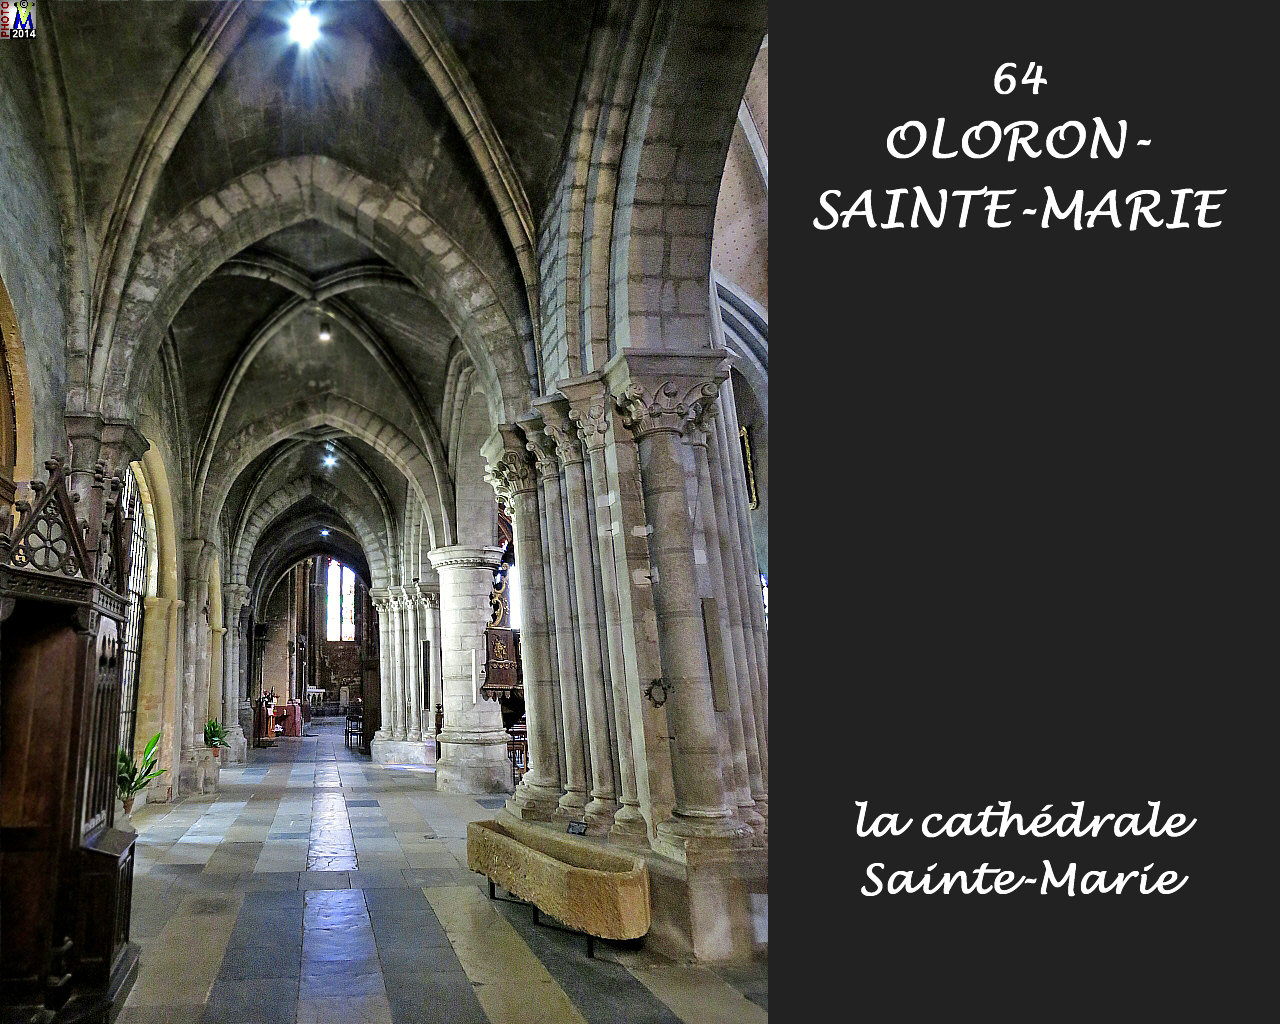 64OLORON-STE-MARIE_cathedrale_208.jpg